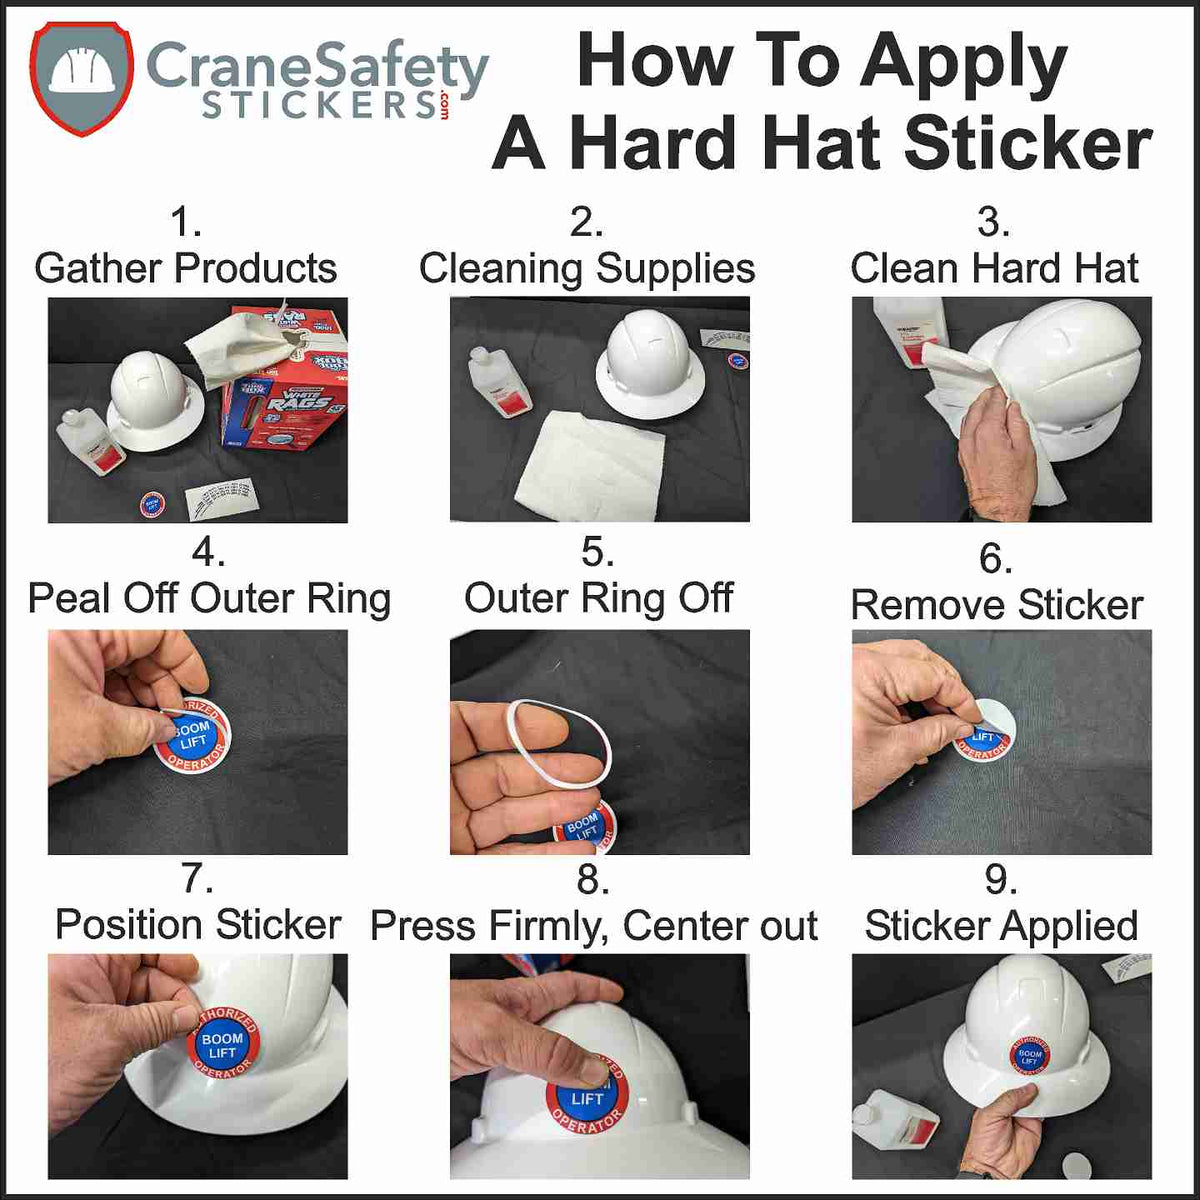 Directions on how to apply a red and black accident free three year award sticker to a hard hat.